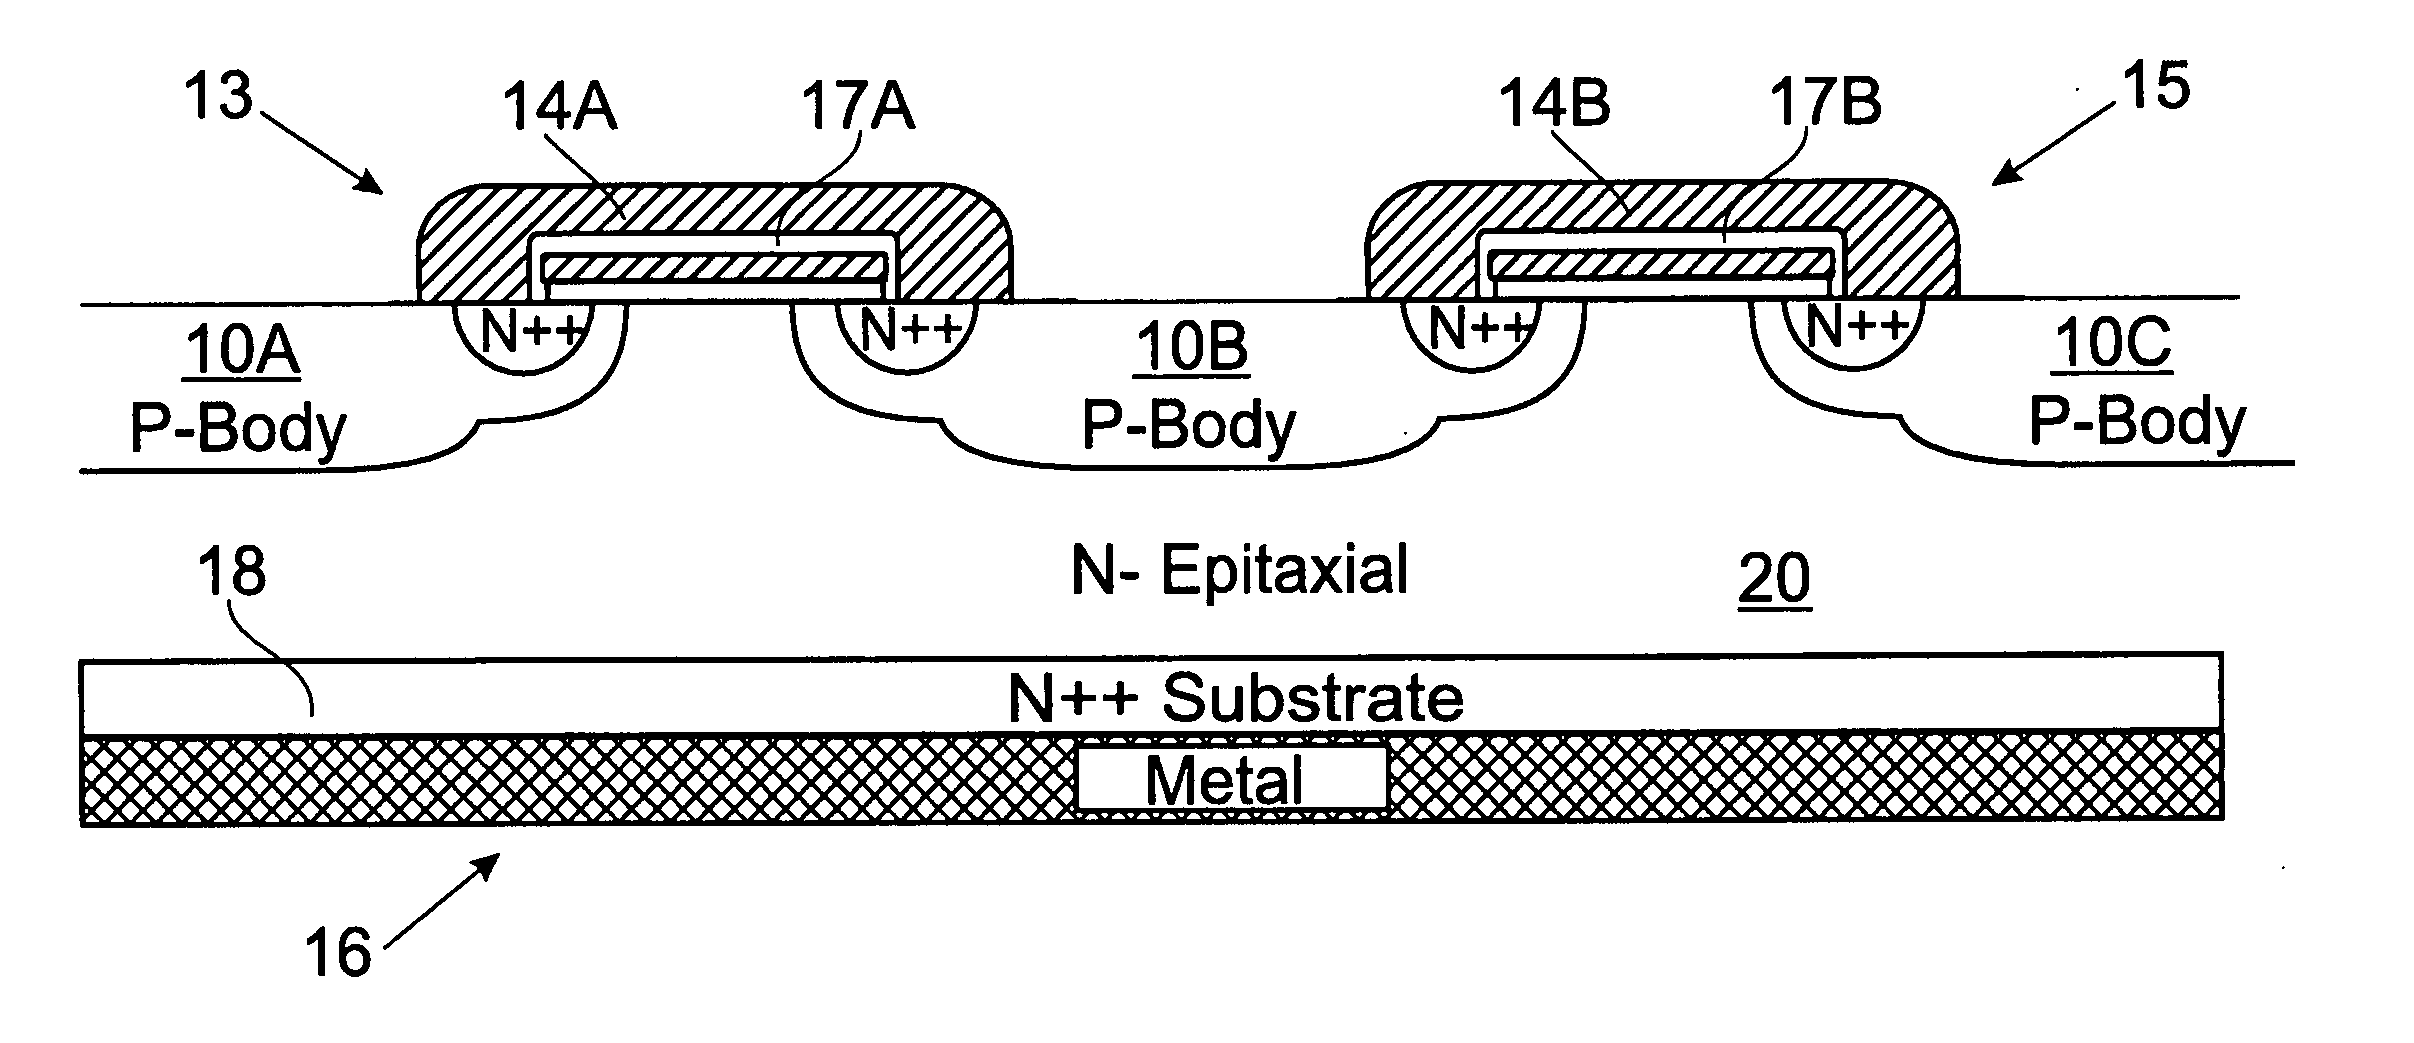 Integrated electronic disconnecting circuits, methods, and systems